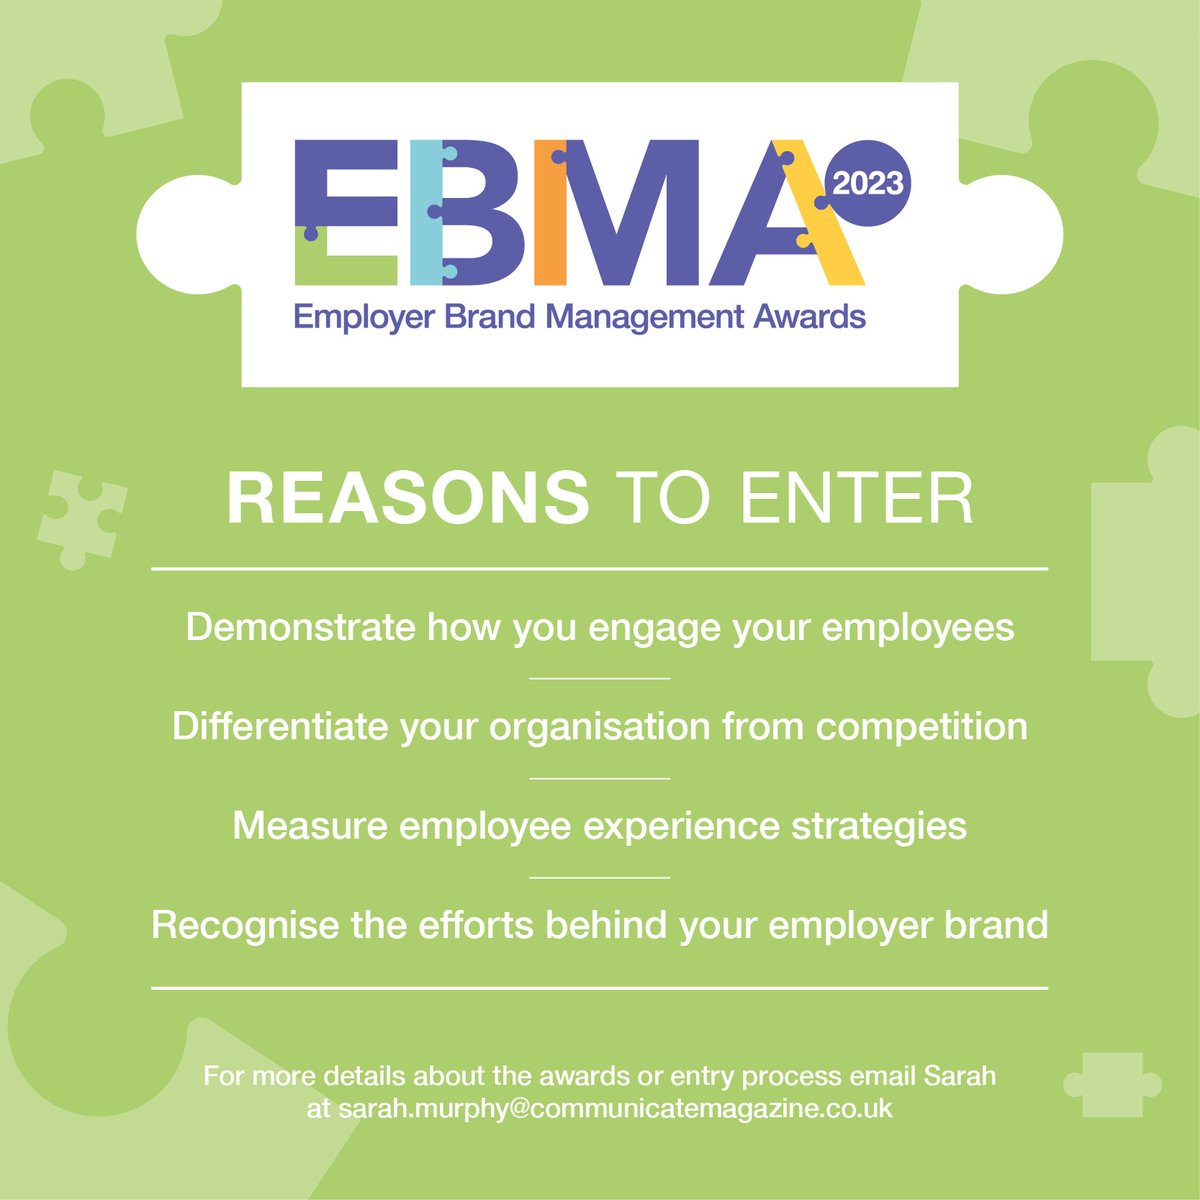 Entering the Employer Brand Management Awards is an opportunity to engage your employees, develop trust amongst your stakeholders, and gain recognition for your organisation’s achievements over the past 18 months.
#EBMAwards #EmployerBrand #EVP #EmployerBranding #corporatecomms